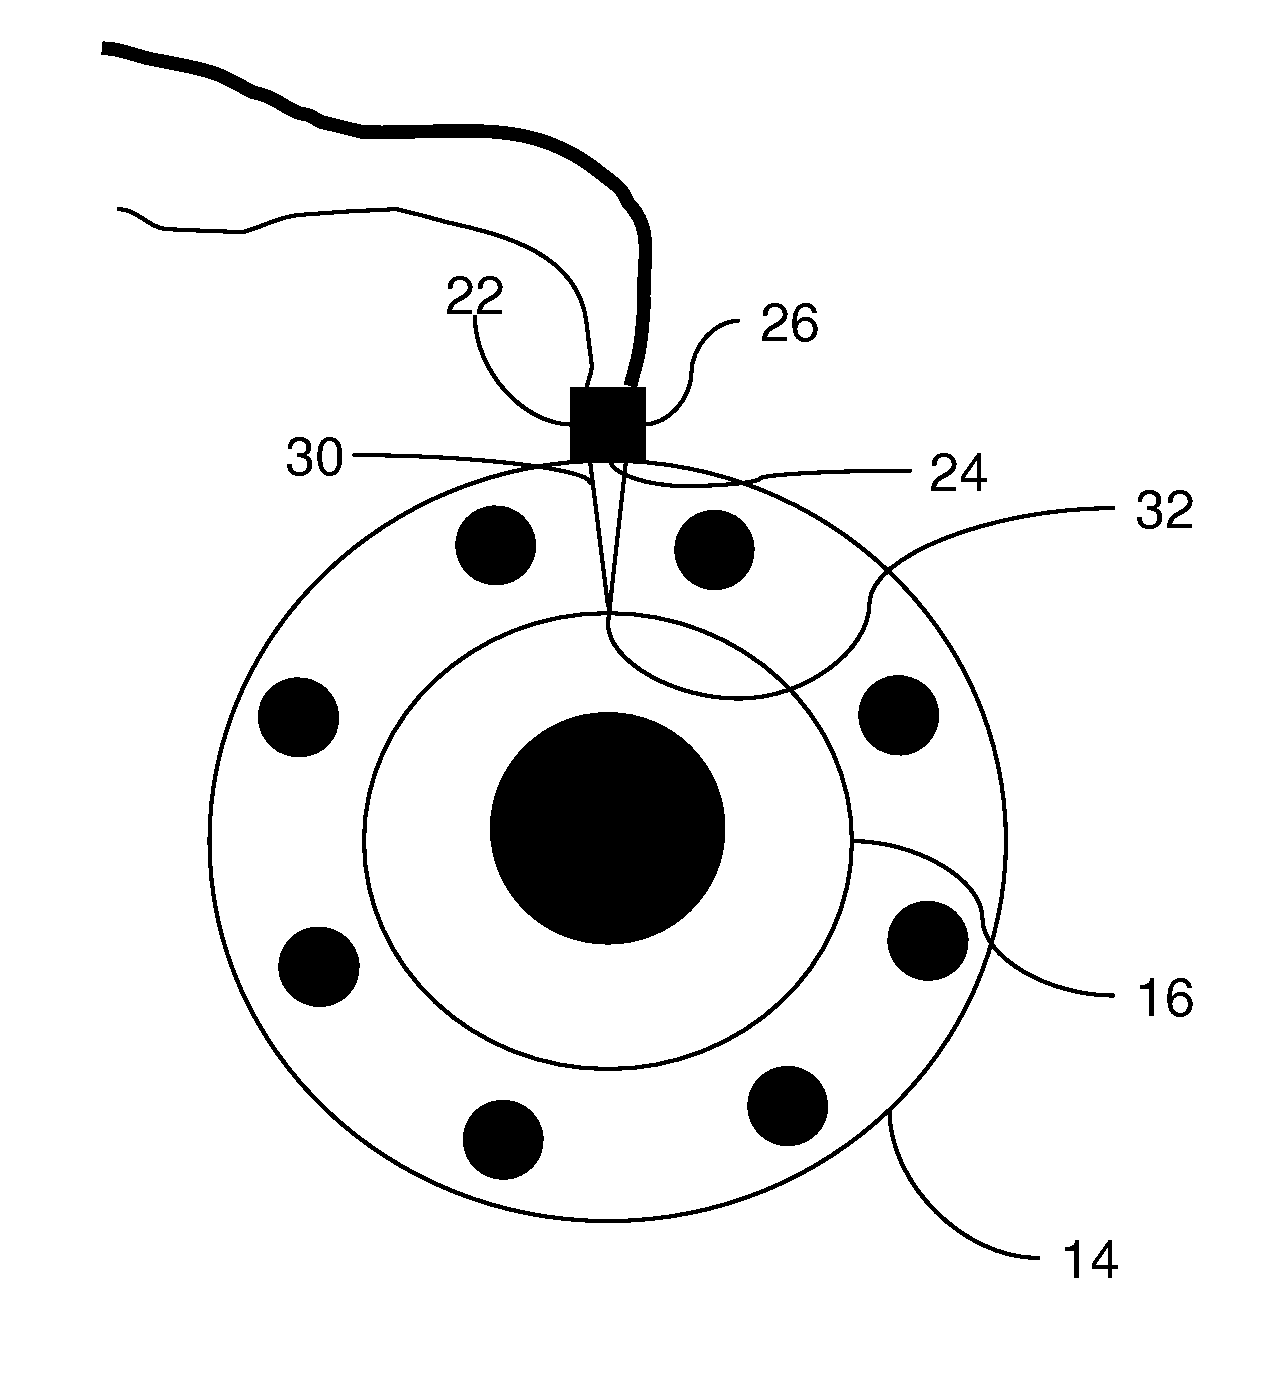 Method and Apparatus for Spectroscopic Measurements in the Combustion Zone of a Gas Turbine Engine